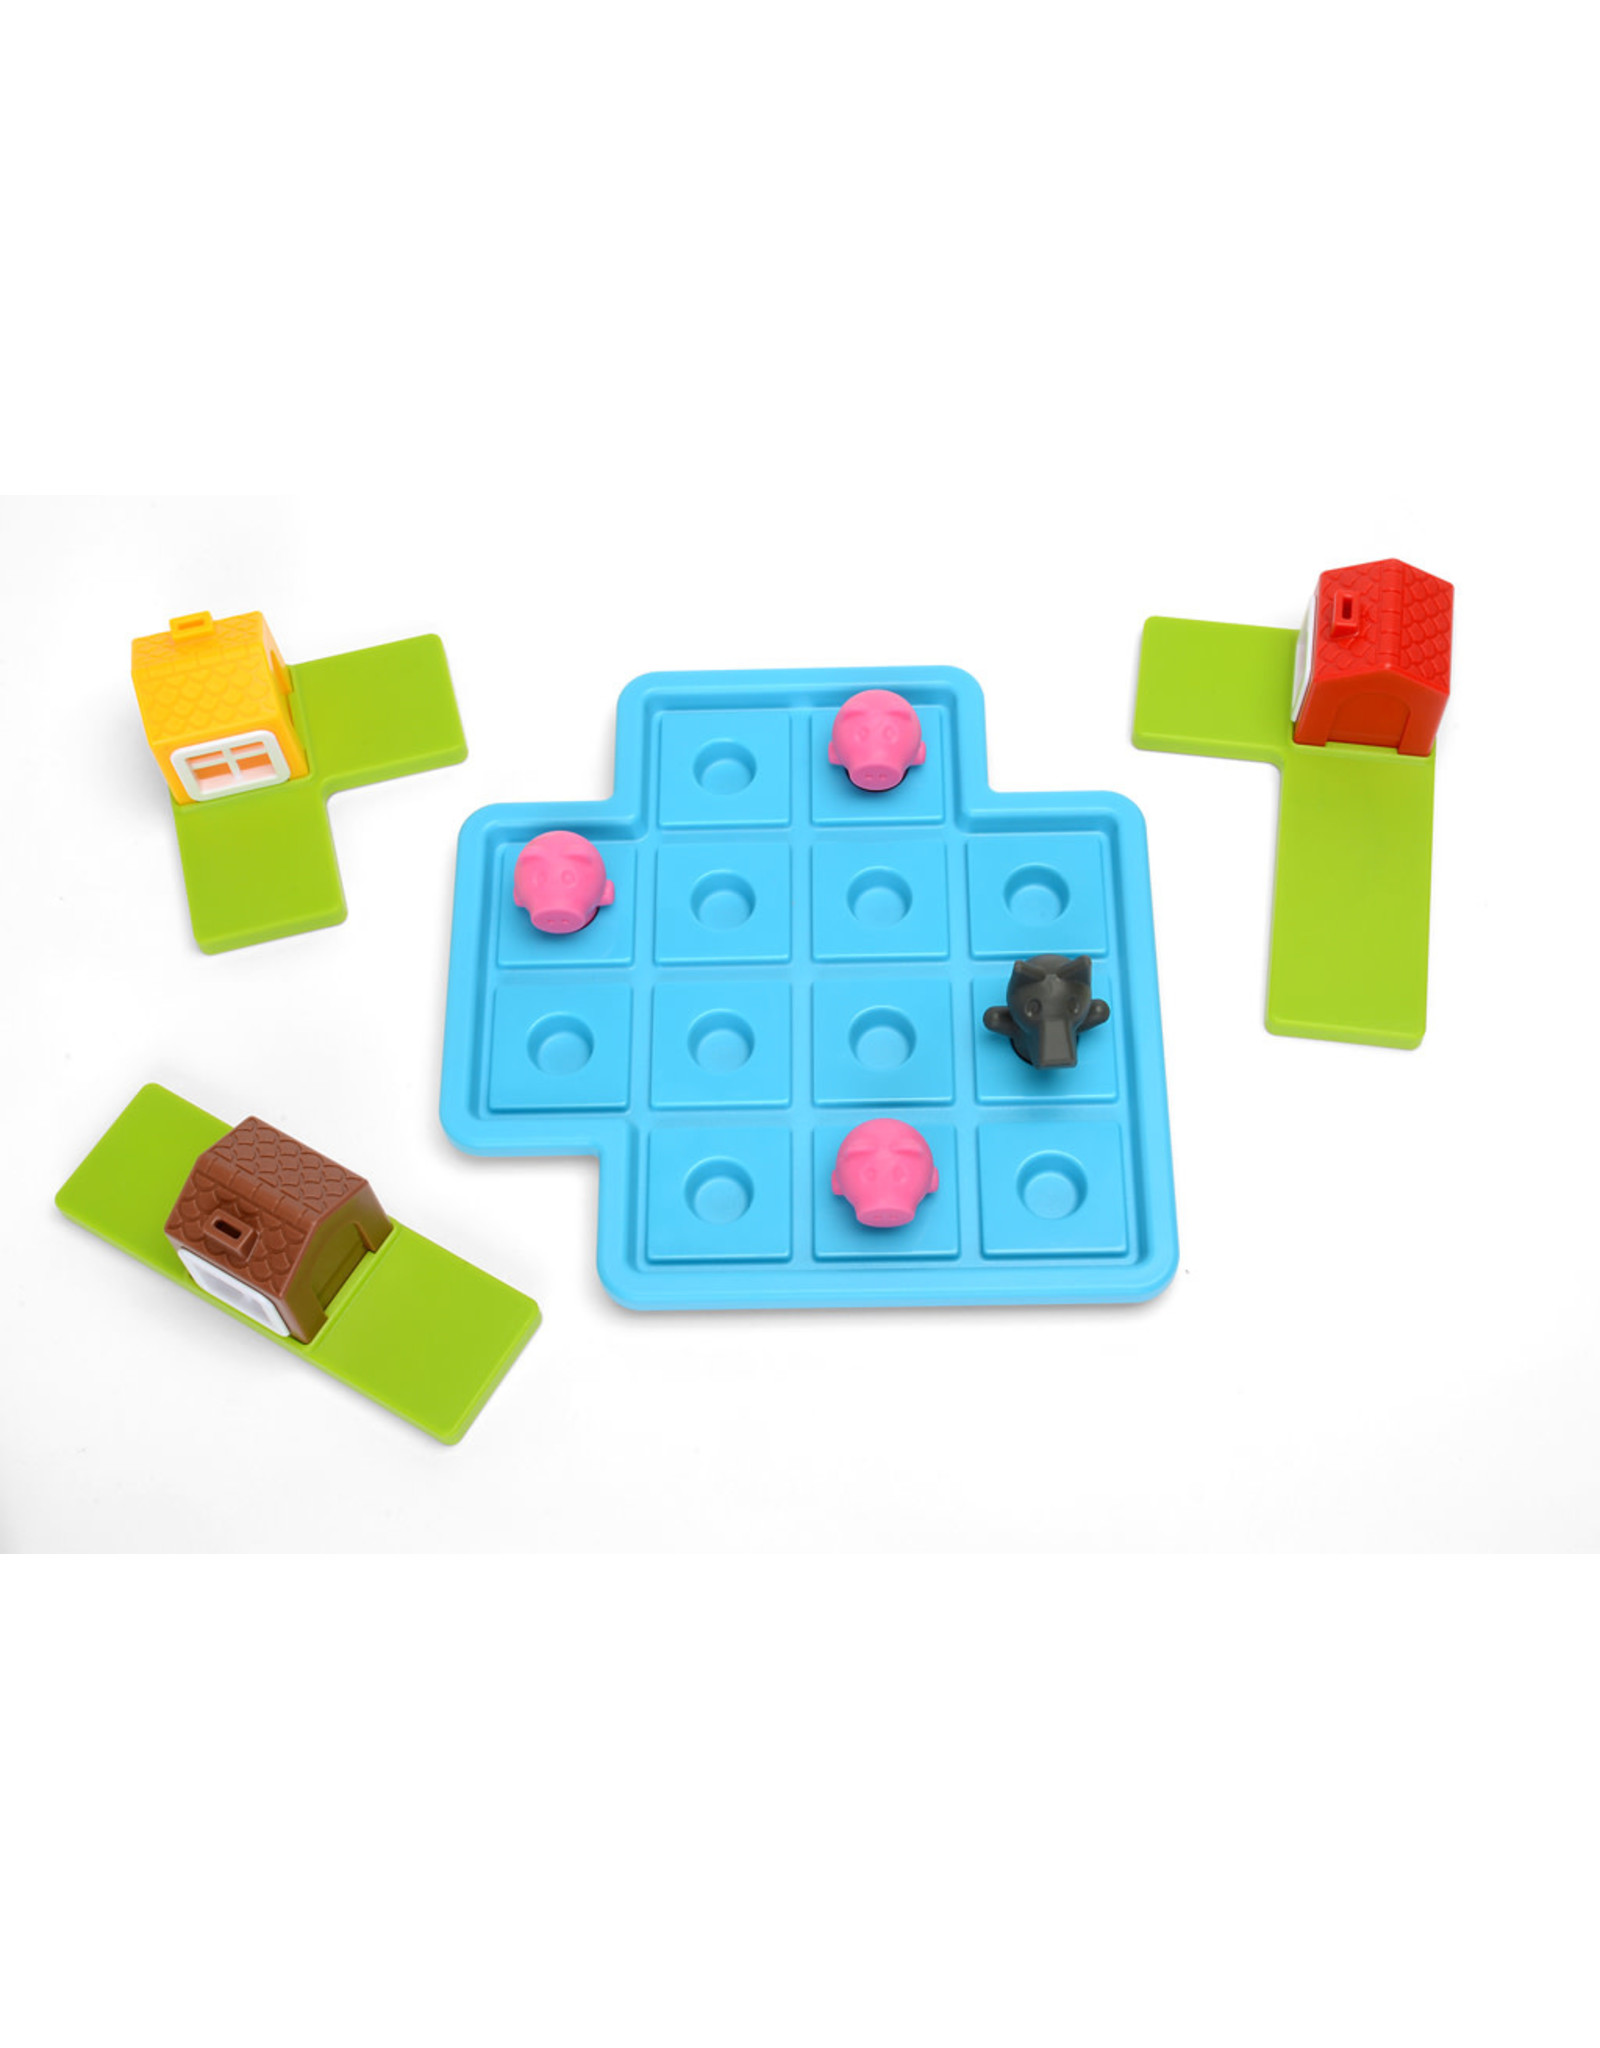 Smart Toys and Games Three Little Piggies, Deluxe